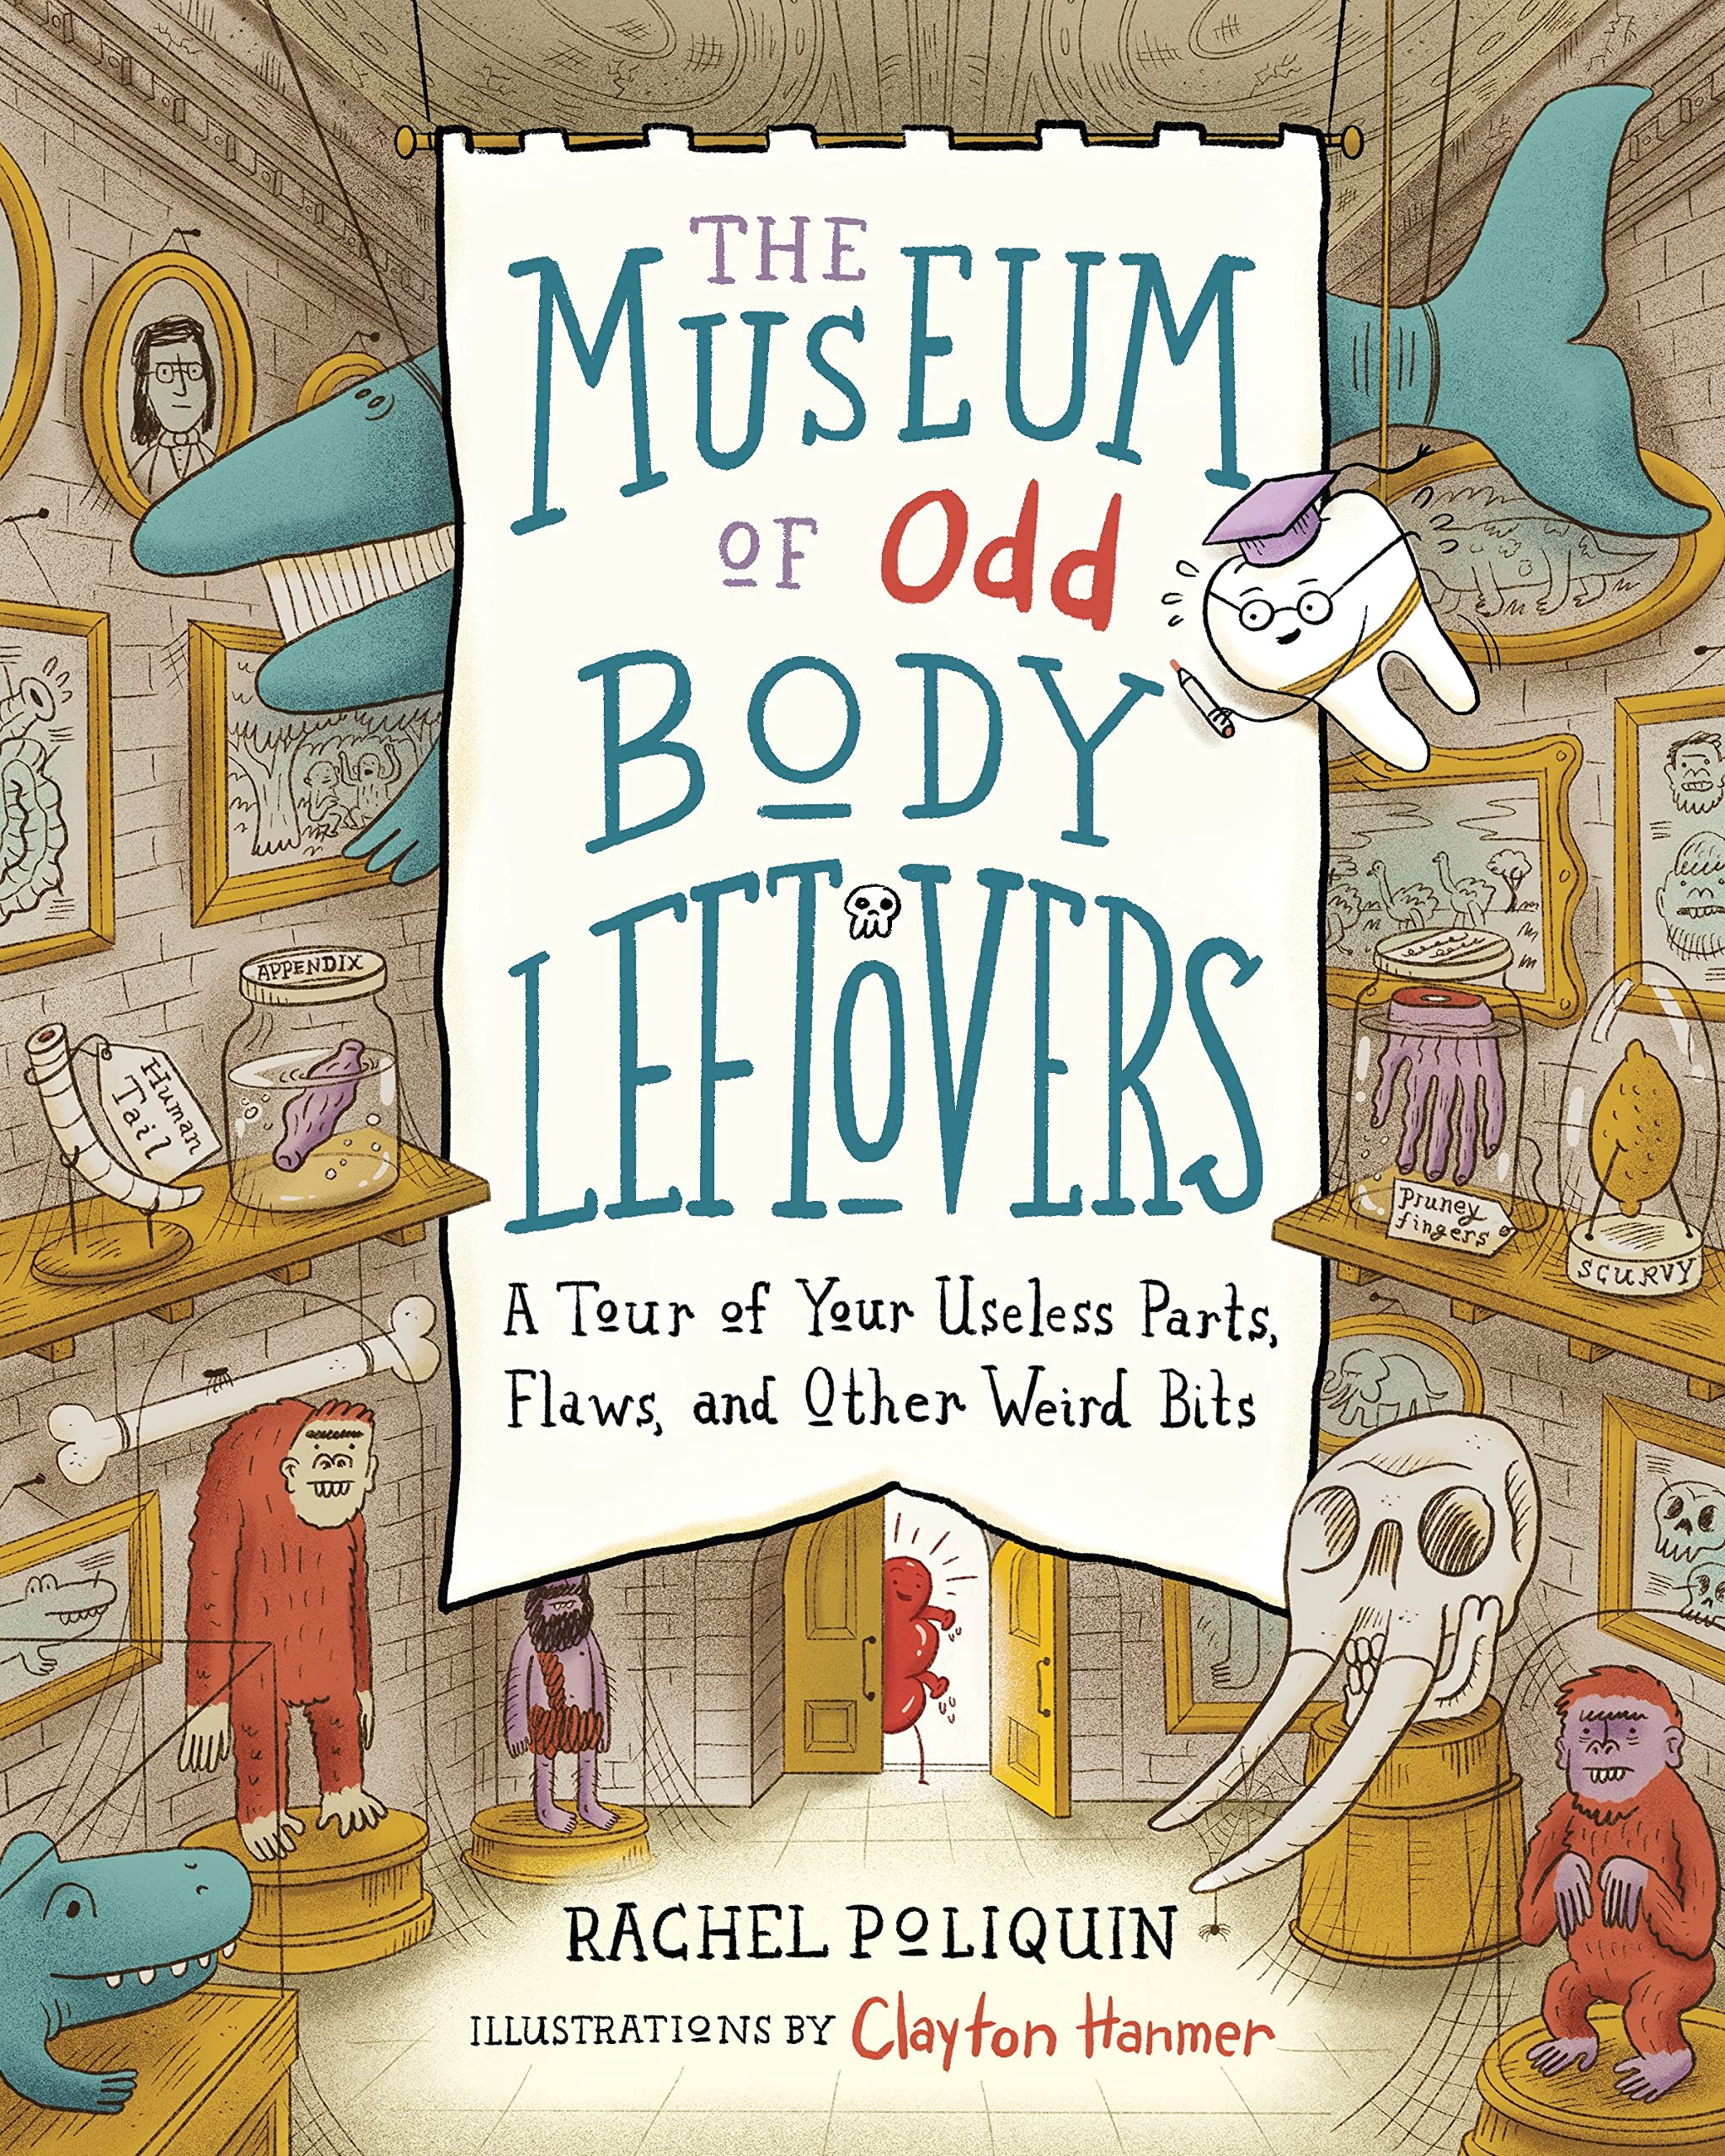 The Museum of Odd Body Leftovers: A Tour of Your Useless Parts, Flaws, and Other Weird Bits by Rachel Poliquin